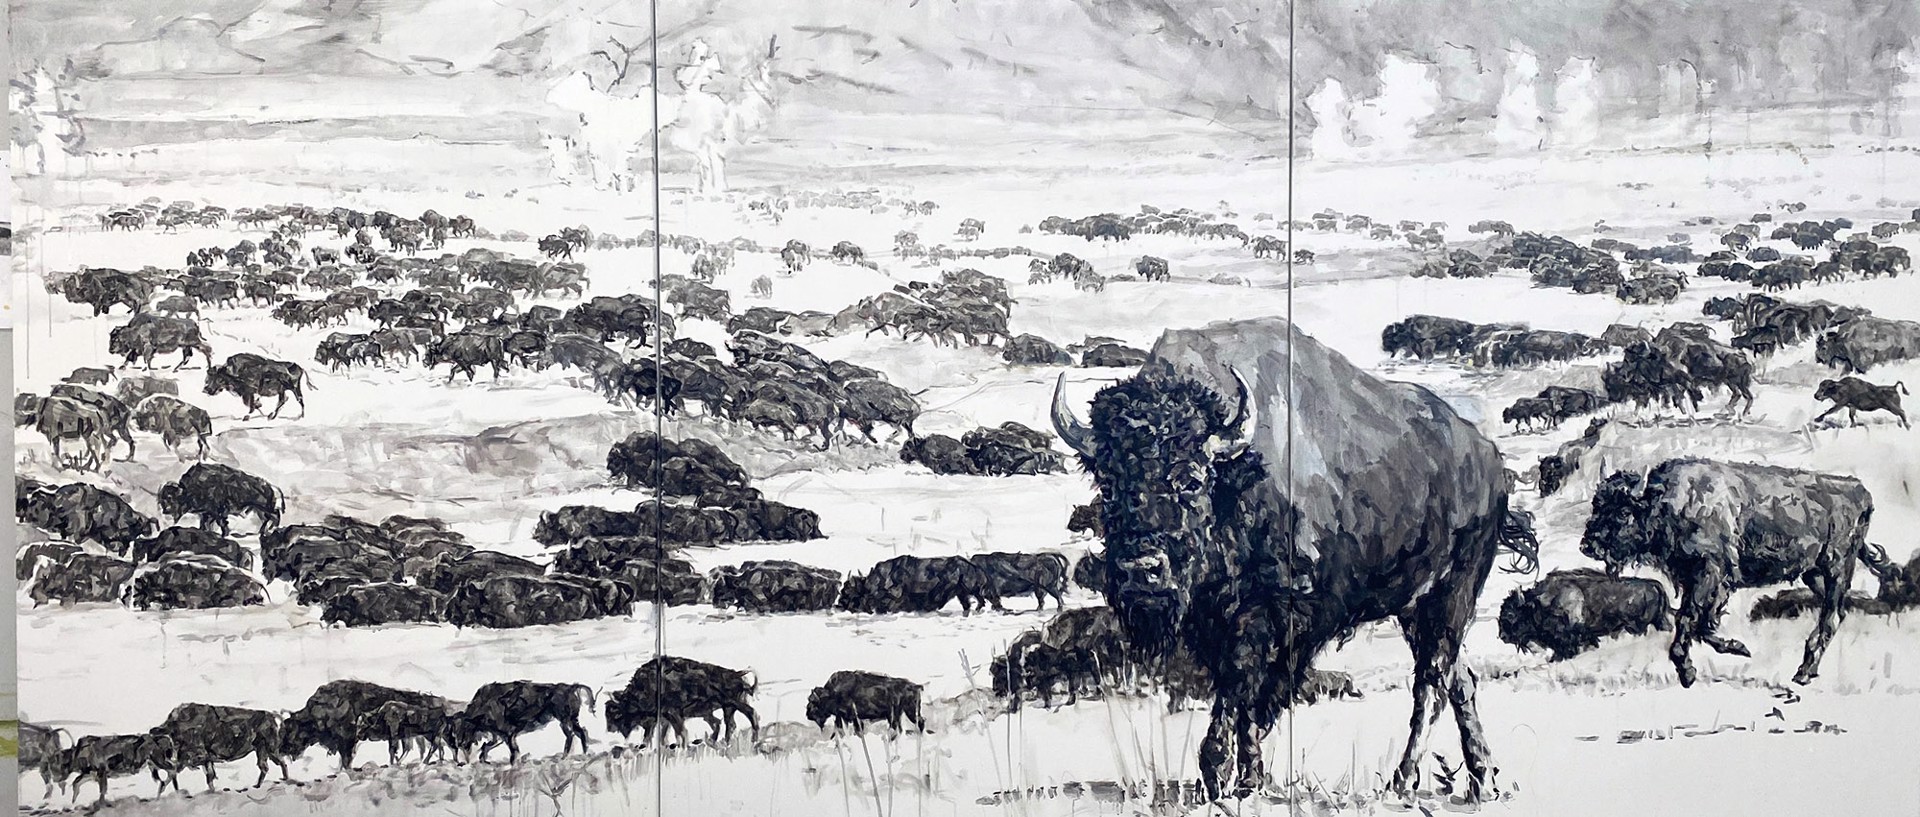 A Black And White Triptych Of A Herd Of Bison Crossing A River By Patricia A Griffin At Gallery Wild